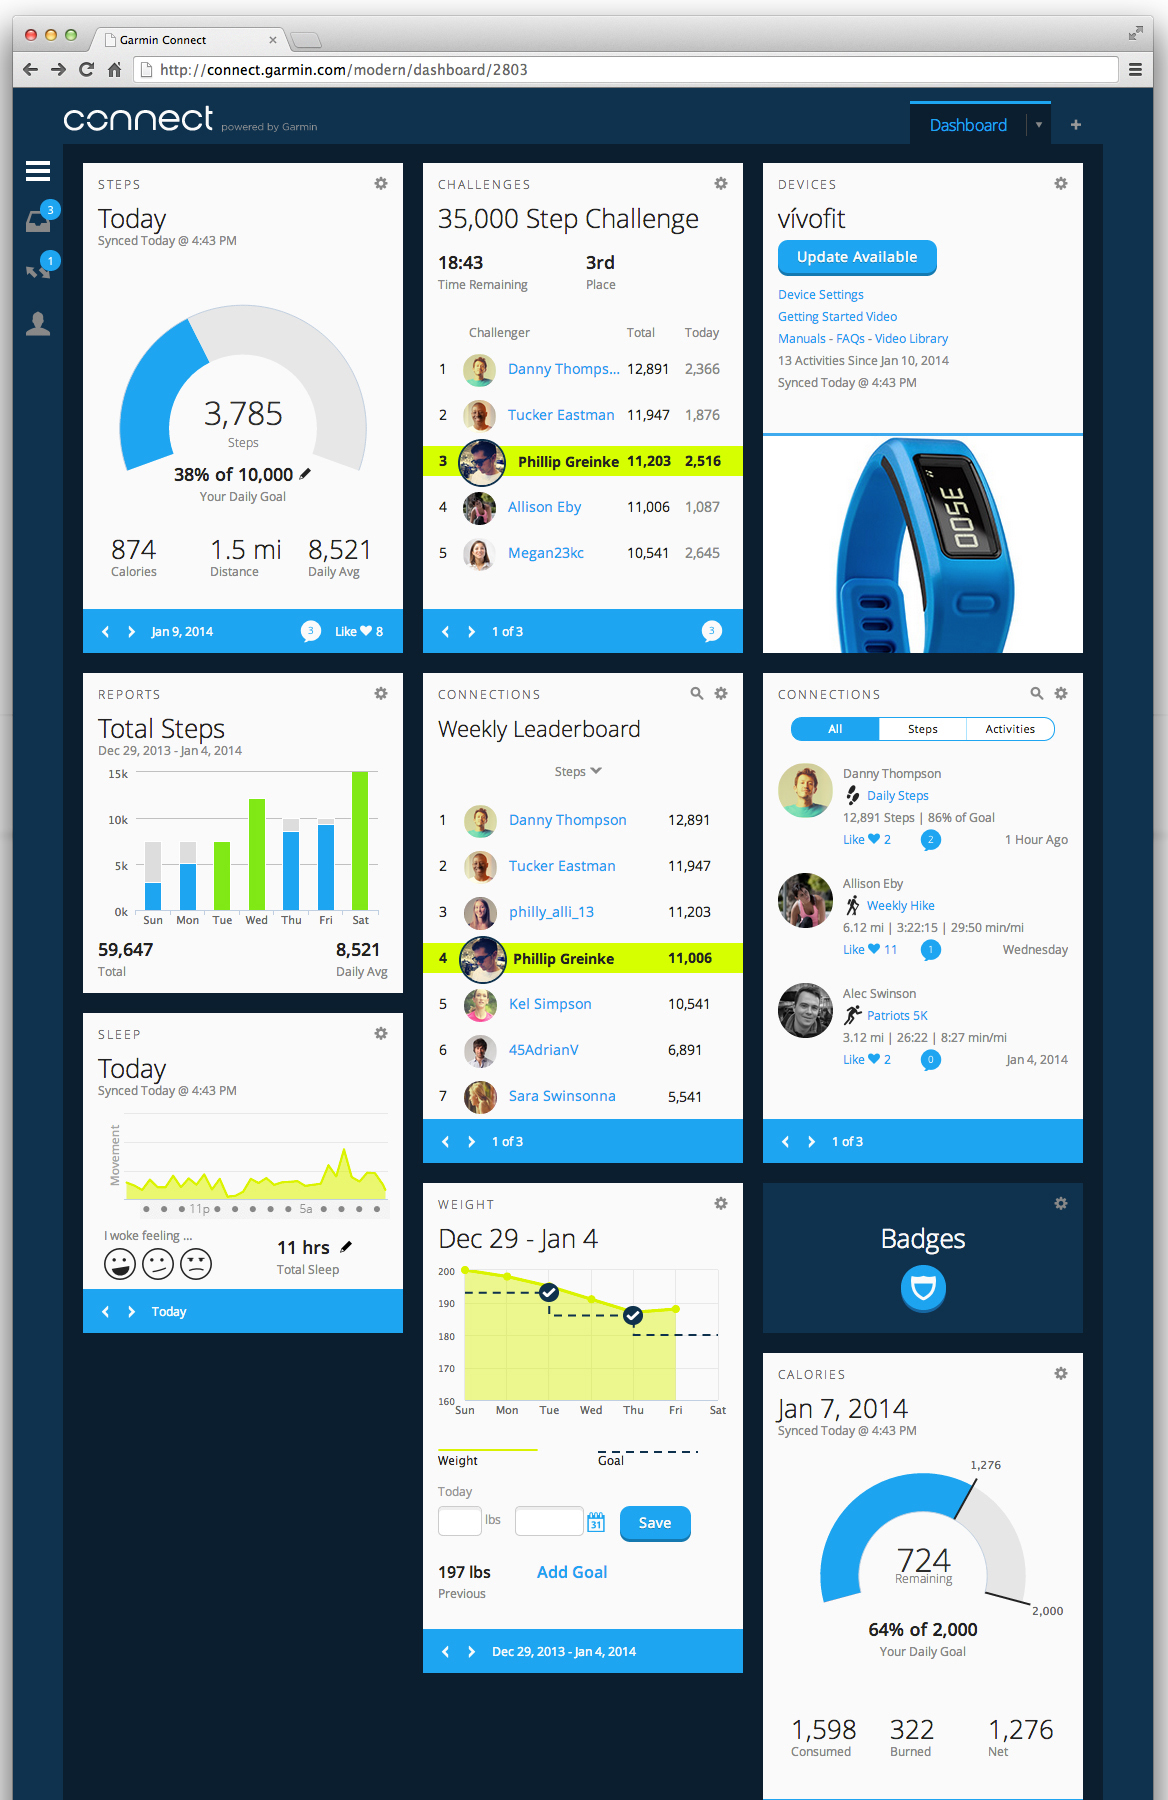 Garmin® Overhauls Free Online Fitness Community with Connect™ Redesign | Business Wire